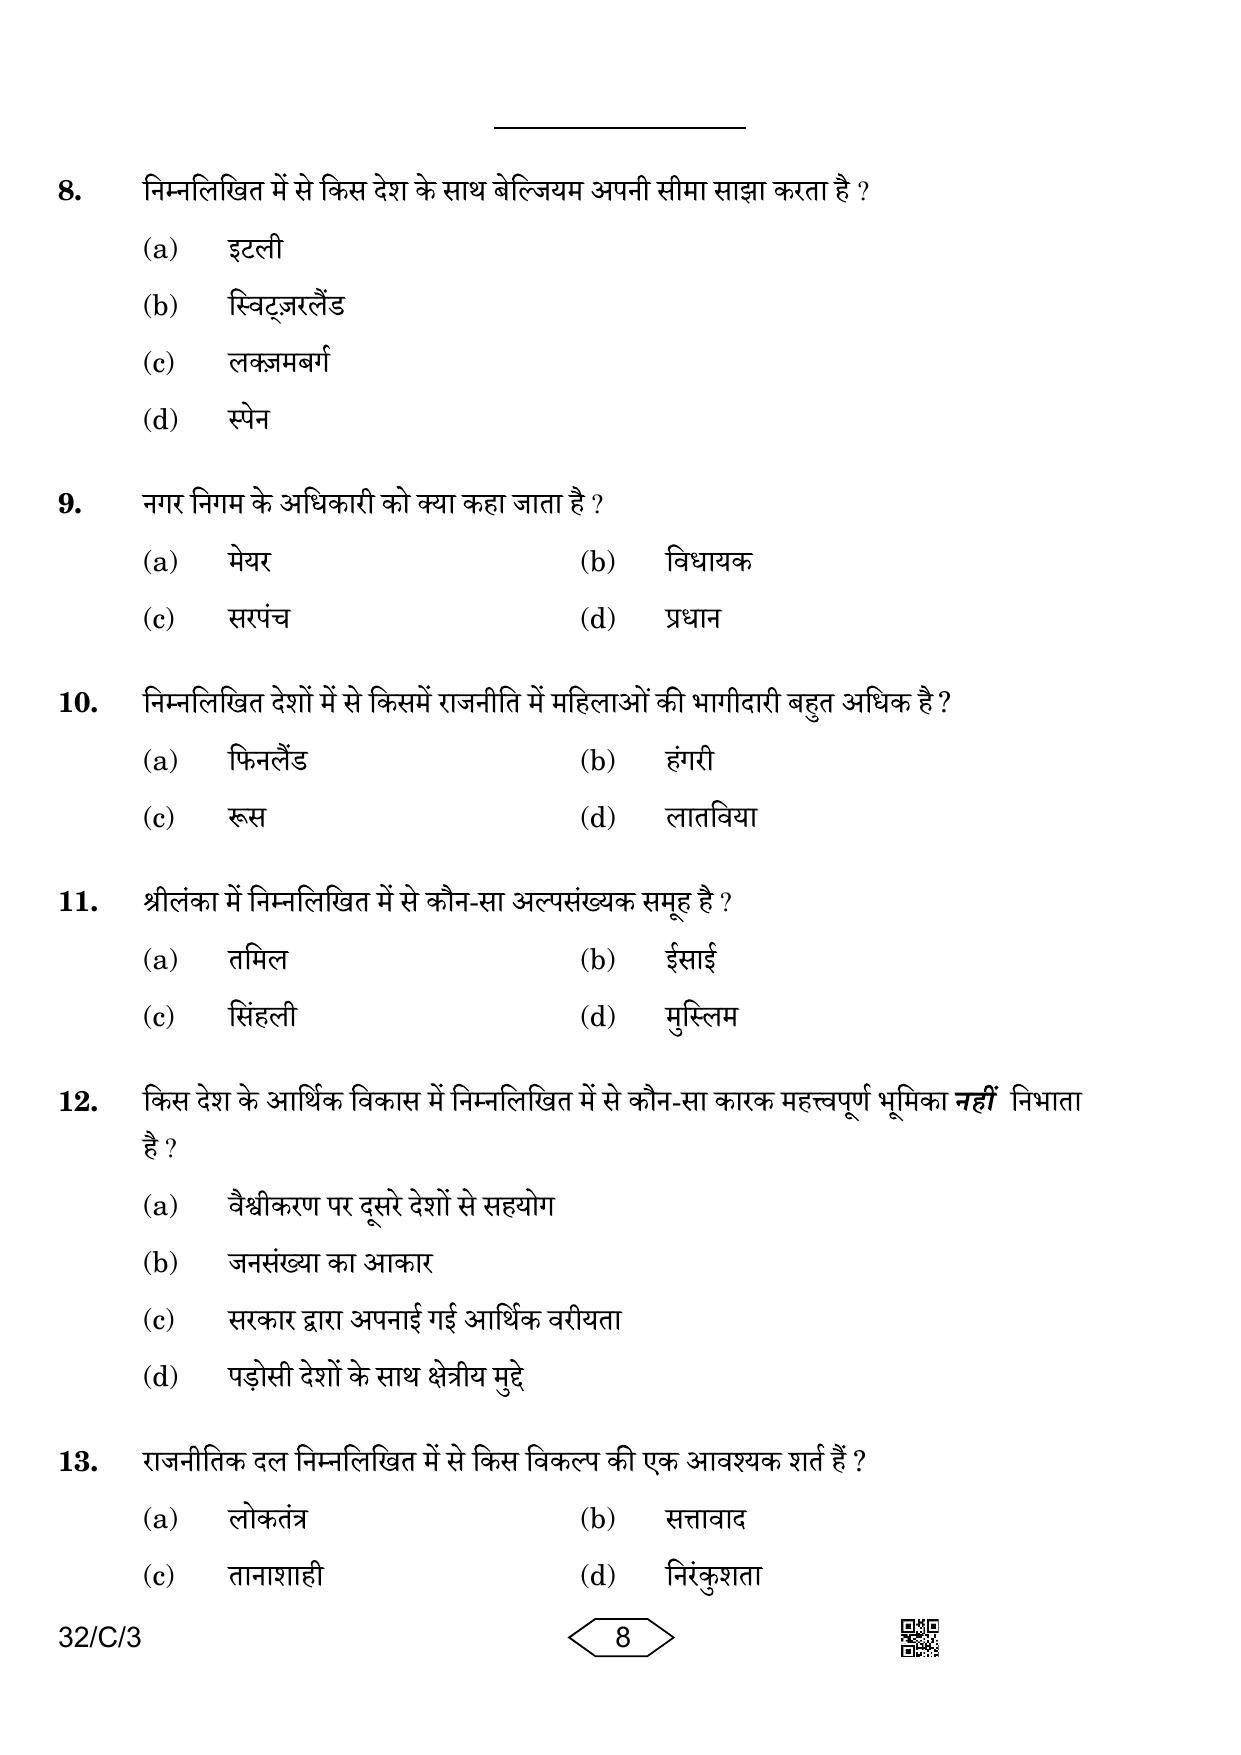 CBSE Class 10 32-3 Social Science 2023 (Compartment) Question Paper - Page 8